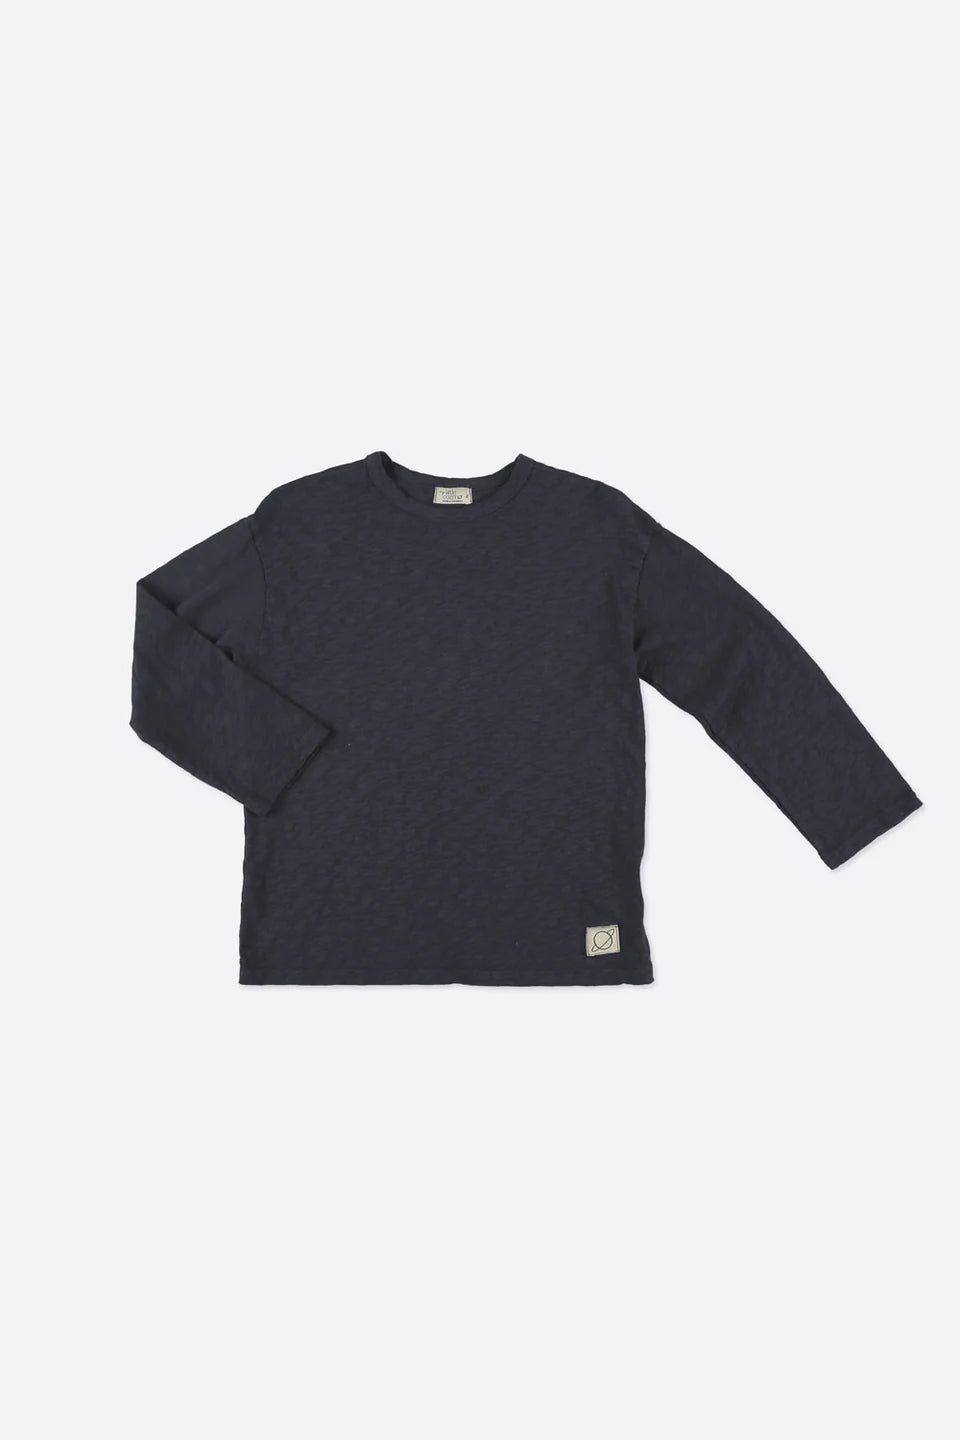 MY LITTLE COZMO SOLID NAVY TOP [FINAL SALE]